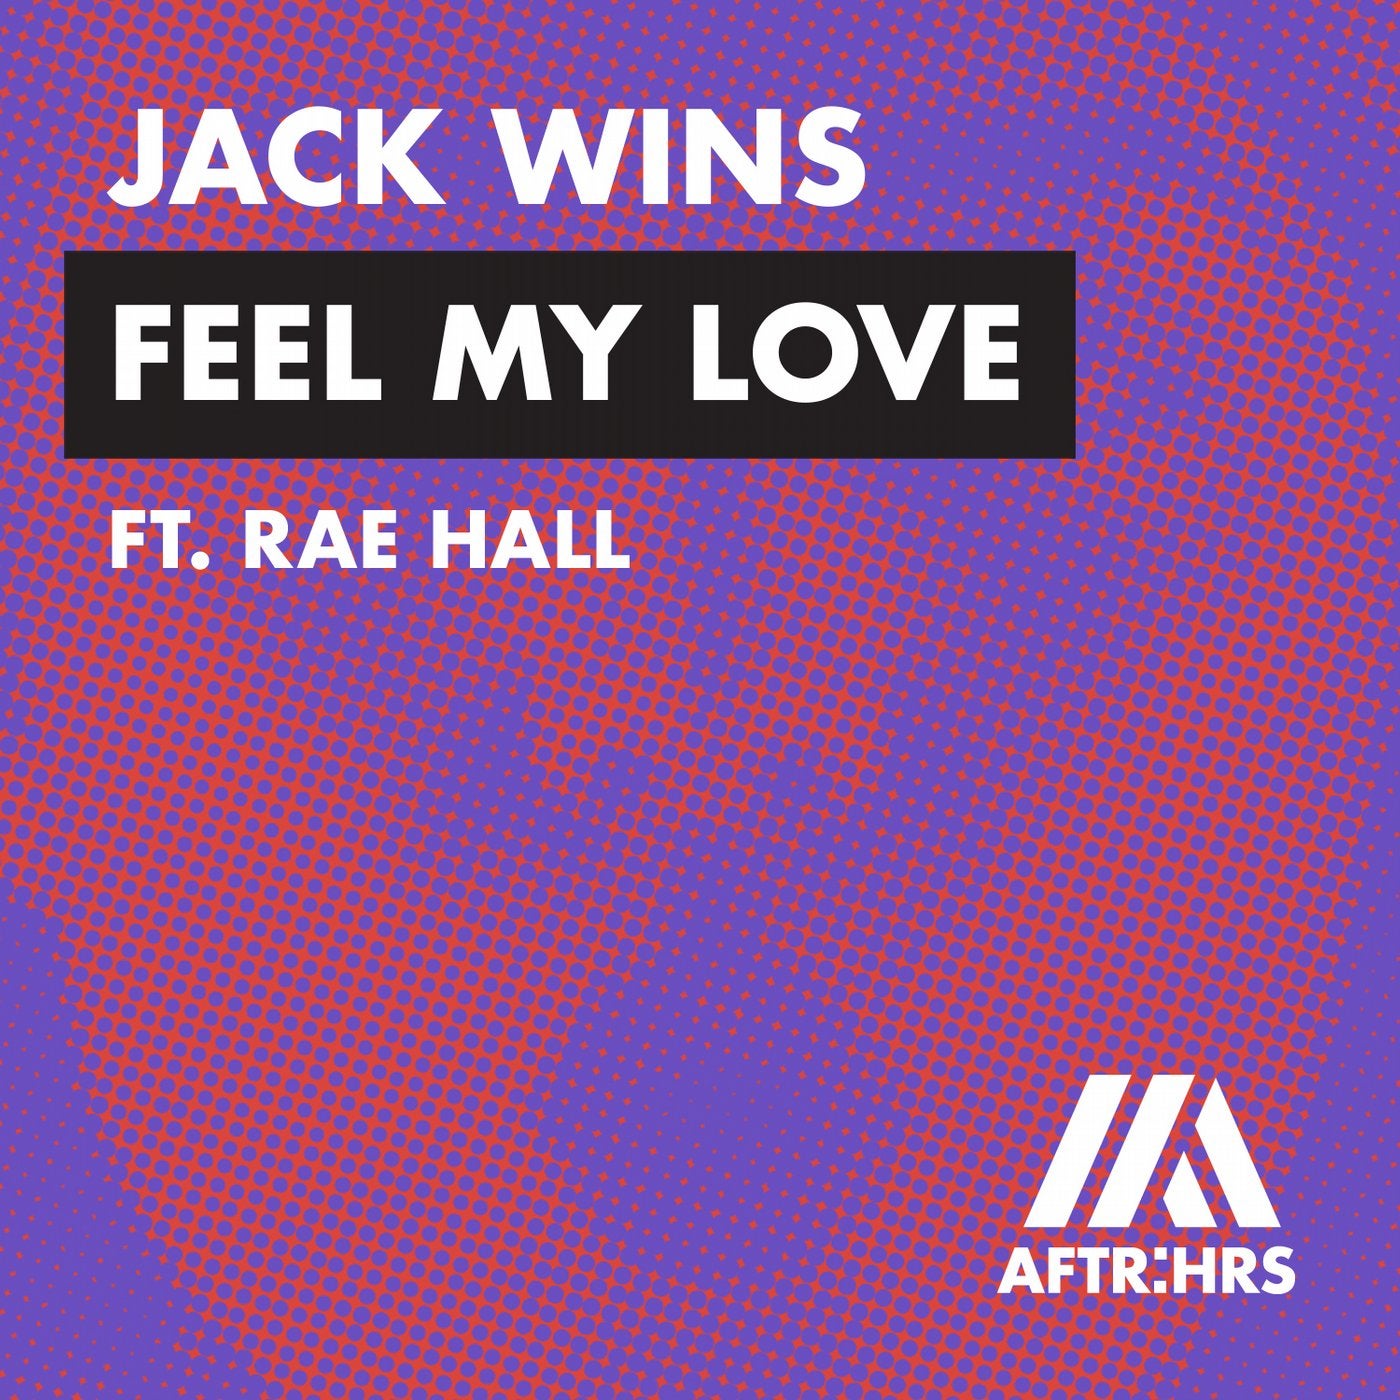 Feel My Love (feat. DJ RAE) [Extended Mix]